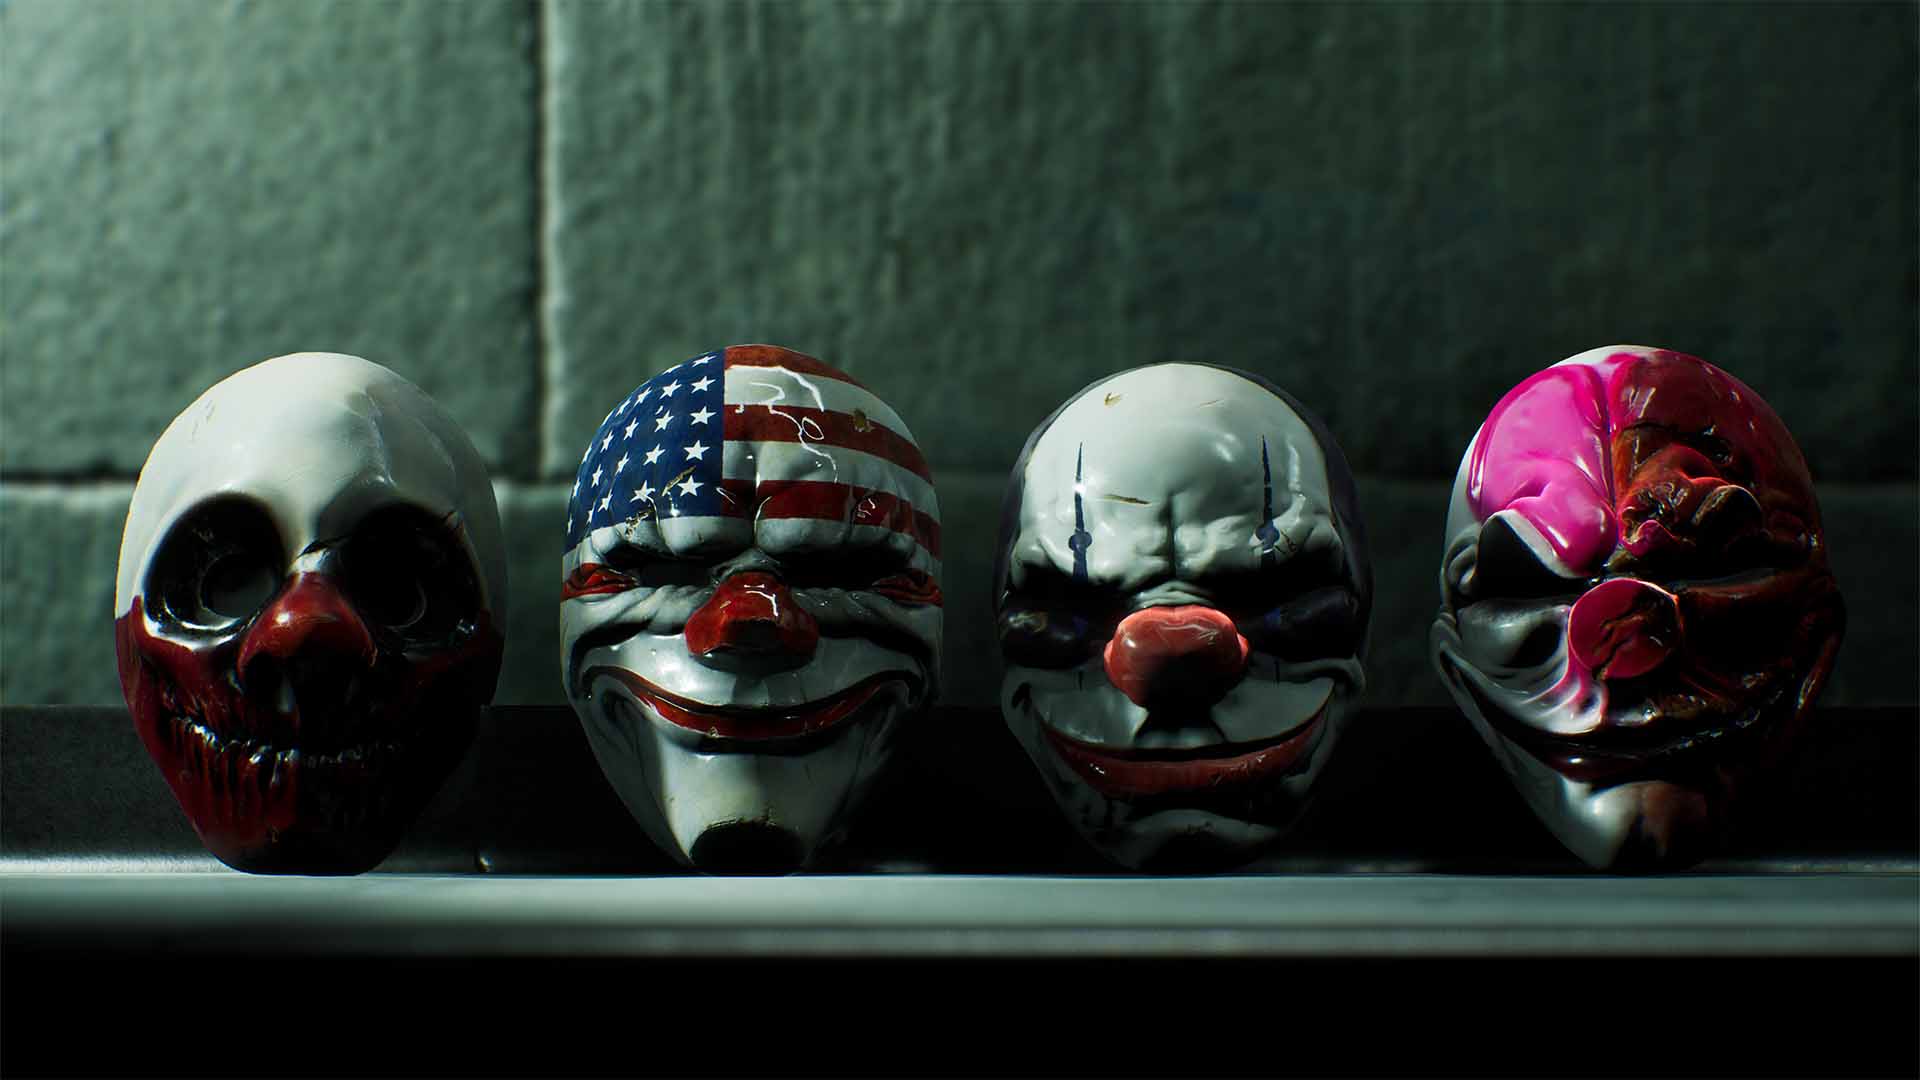 Payday 3 update delayed, studio issues apology